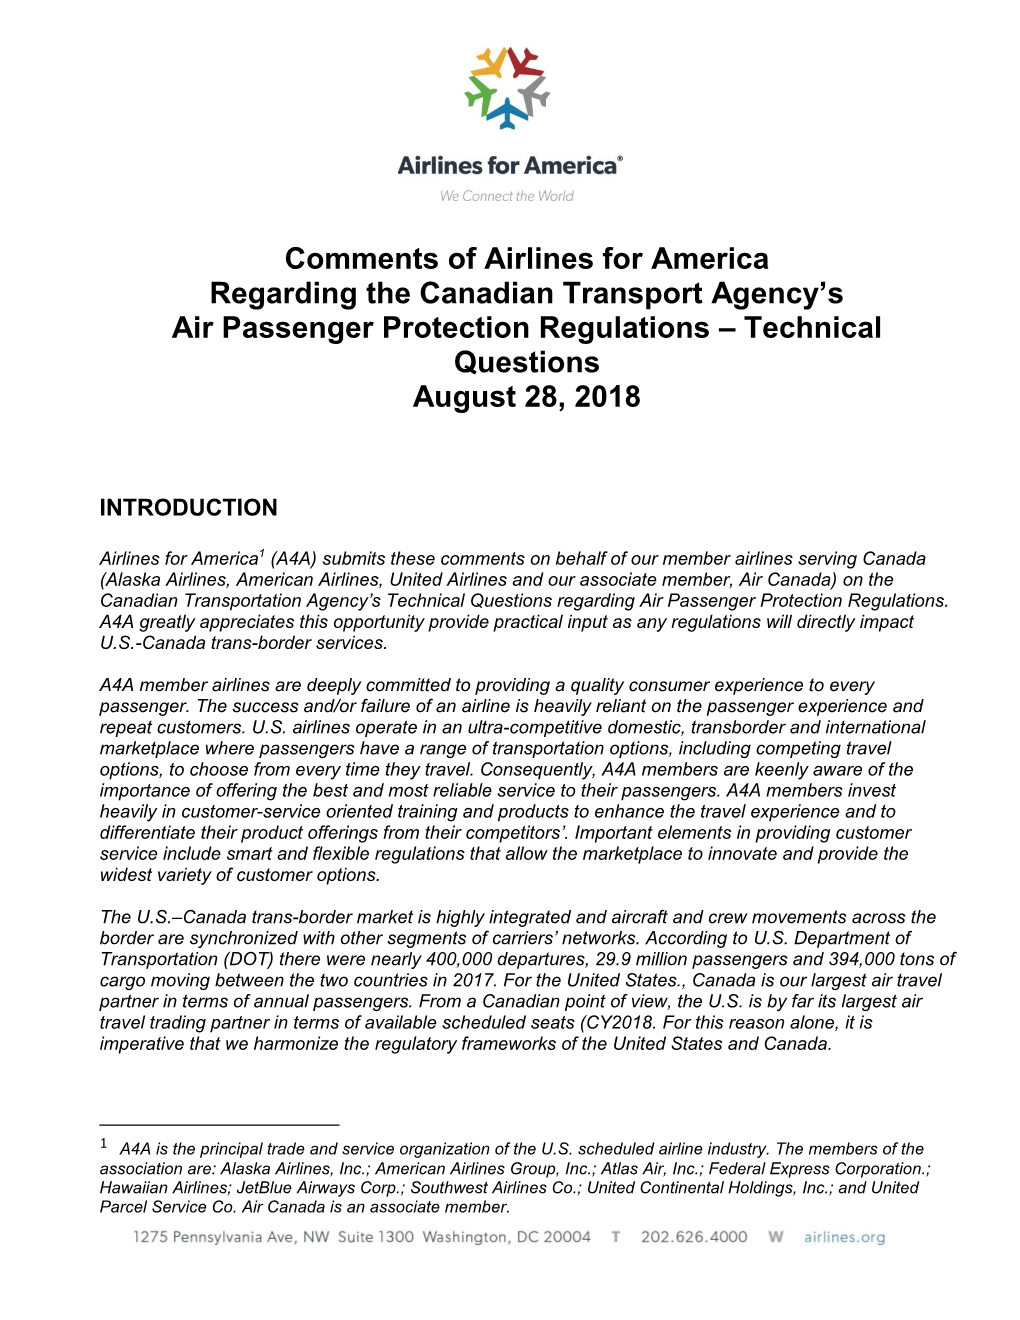 Comments of Airlines for America Regarding the Canadian Transport Agency’S Air Passenger Protection Regulations – Technical Questions August 28, 2018